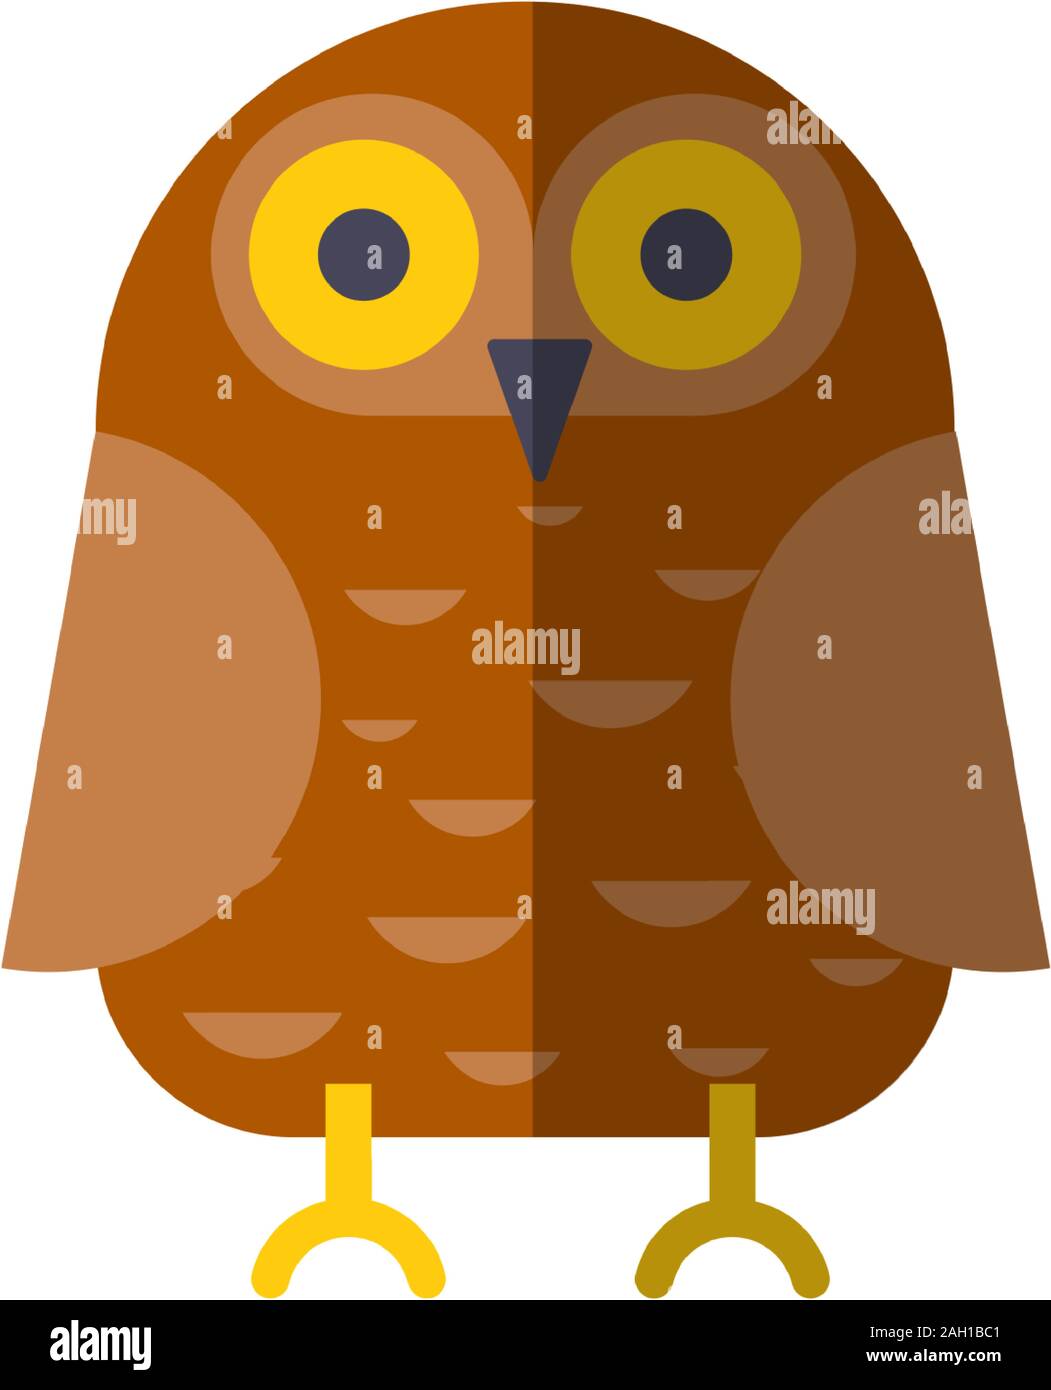 Vector flat owl icon. Vector owl illustration, flat style. Brown forest bird - cartoon flat modern illustration, icon of owl with big yellow eyes and Stock Vector